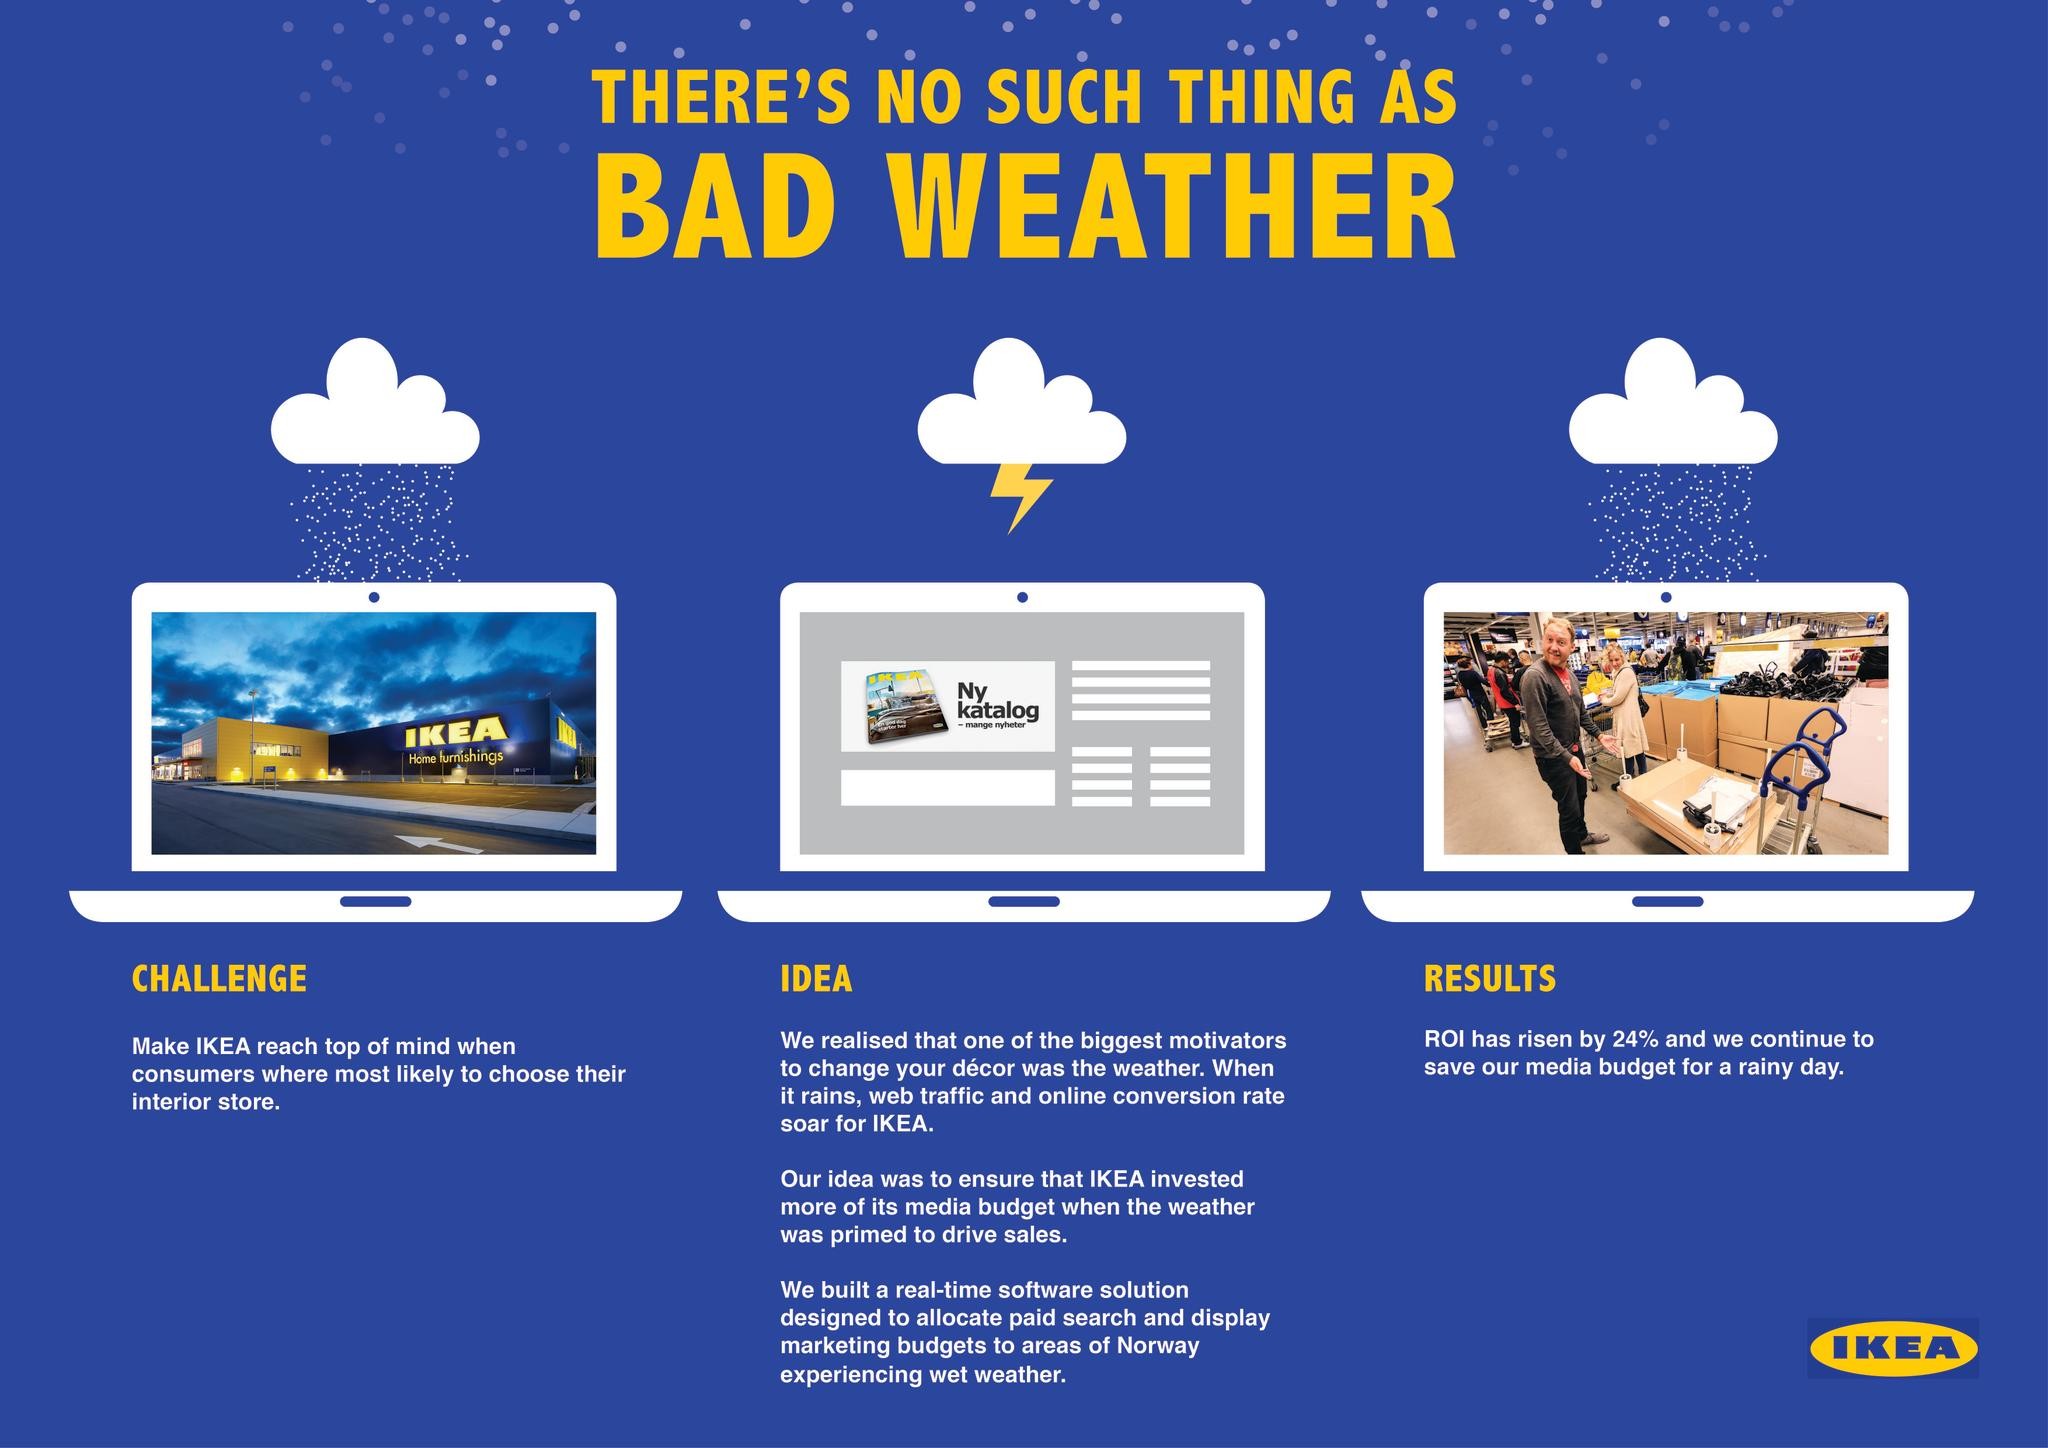 THERE'S NO SUCH THING AS BAD WEATHER